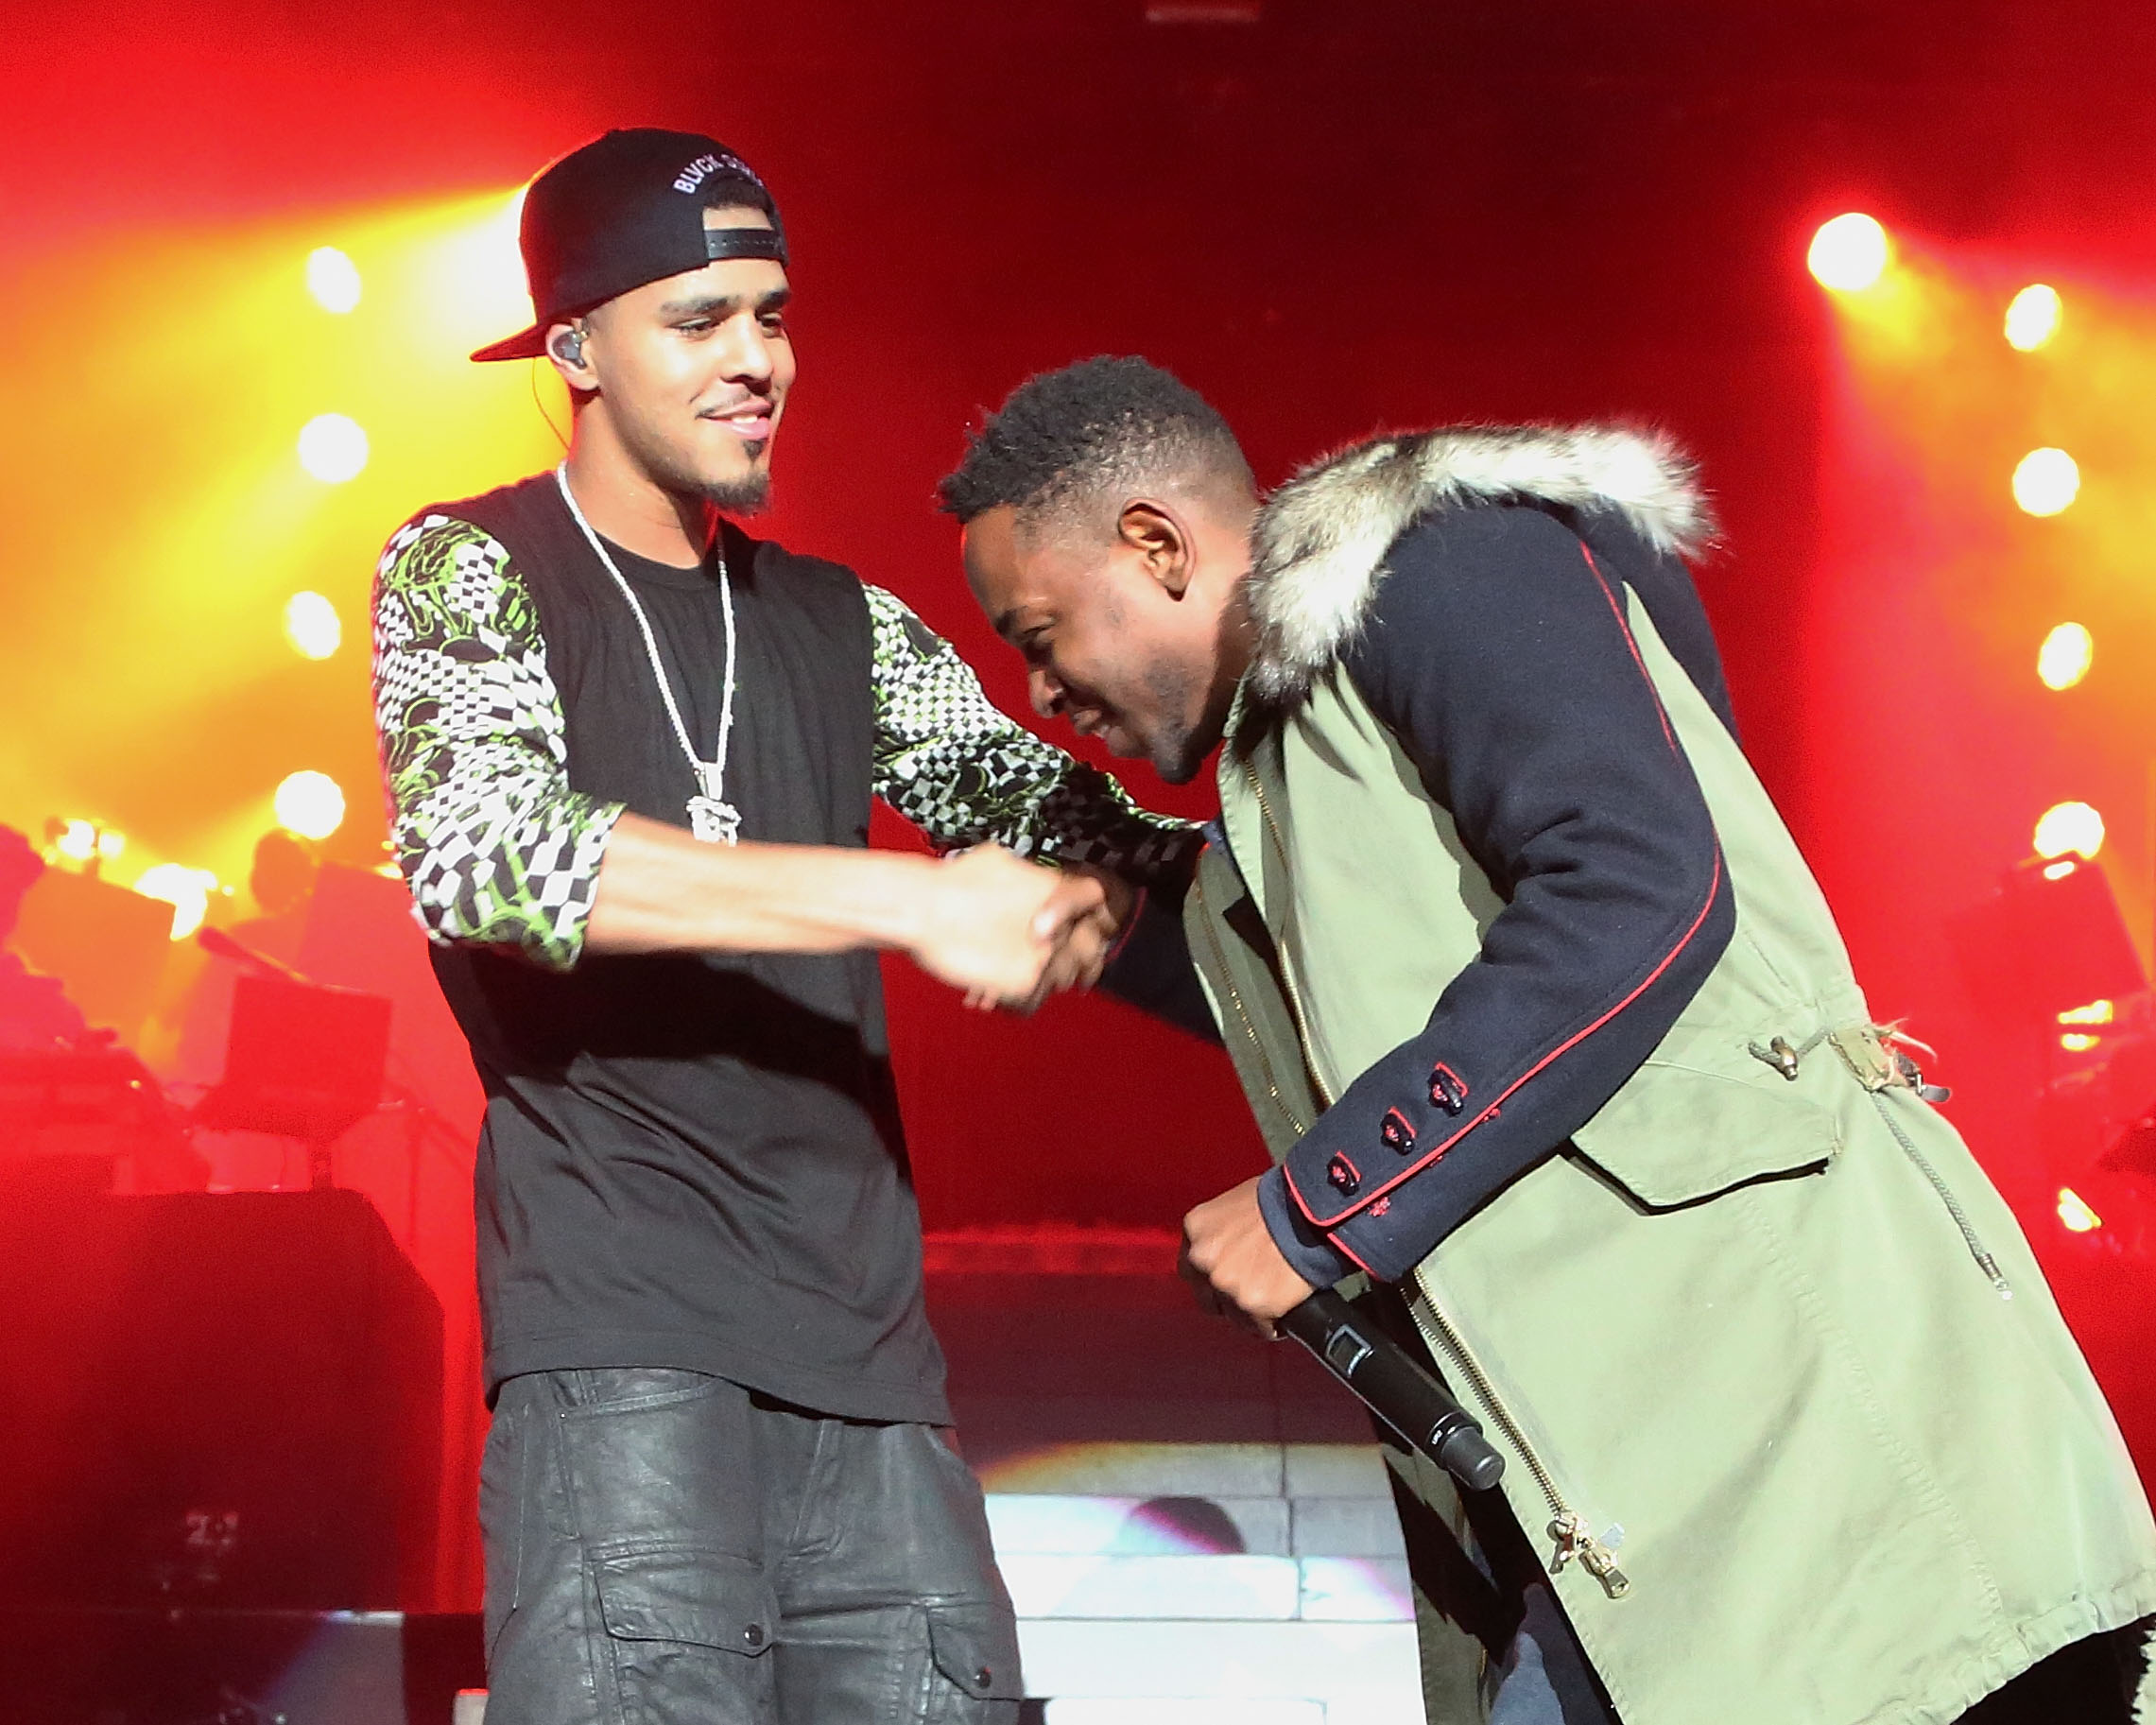 Rappers J. Cole and Kendrick Lamar perform at Madison Square Garden on January 28, 2014